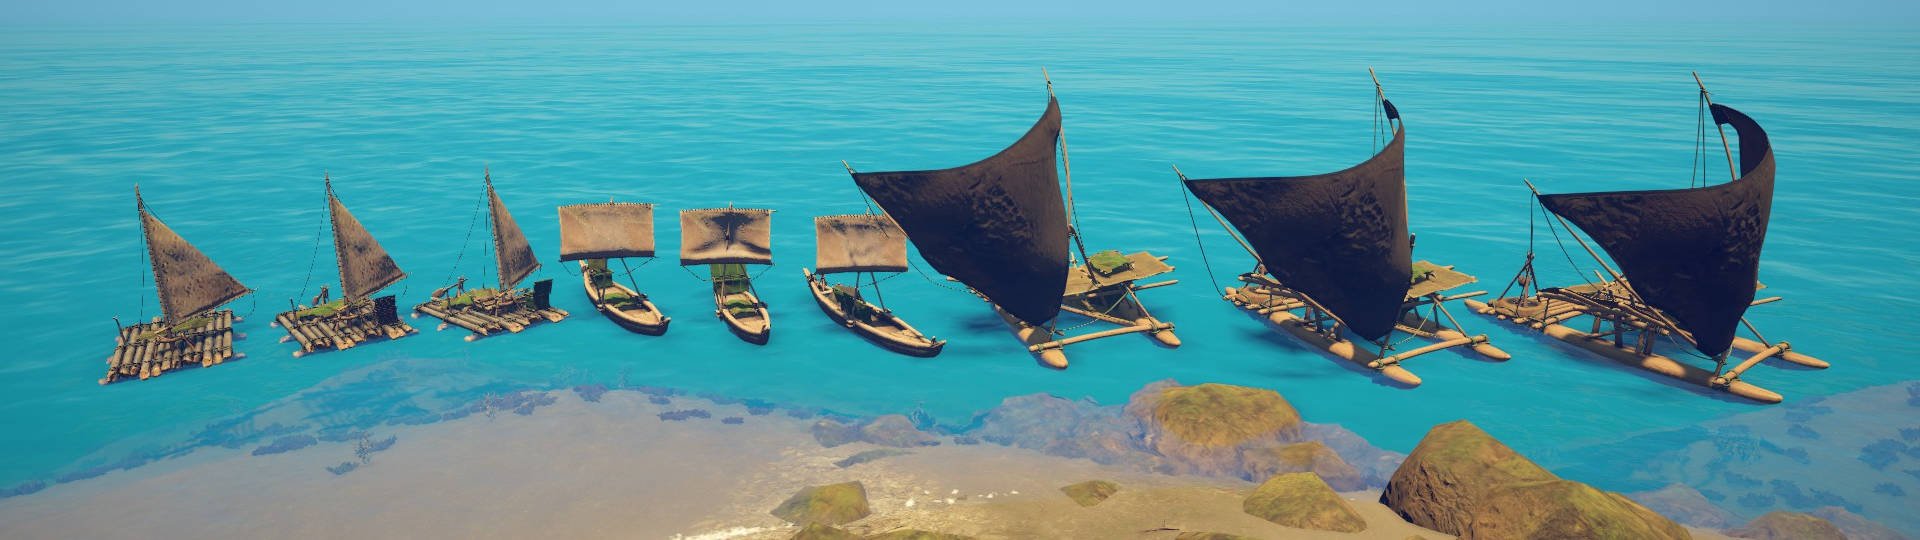 Survival: Fountain of Youth Boat Guide - Every Boat in the Game on Early Access Launch Lined Up Near the Shore